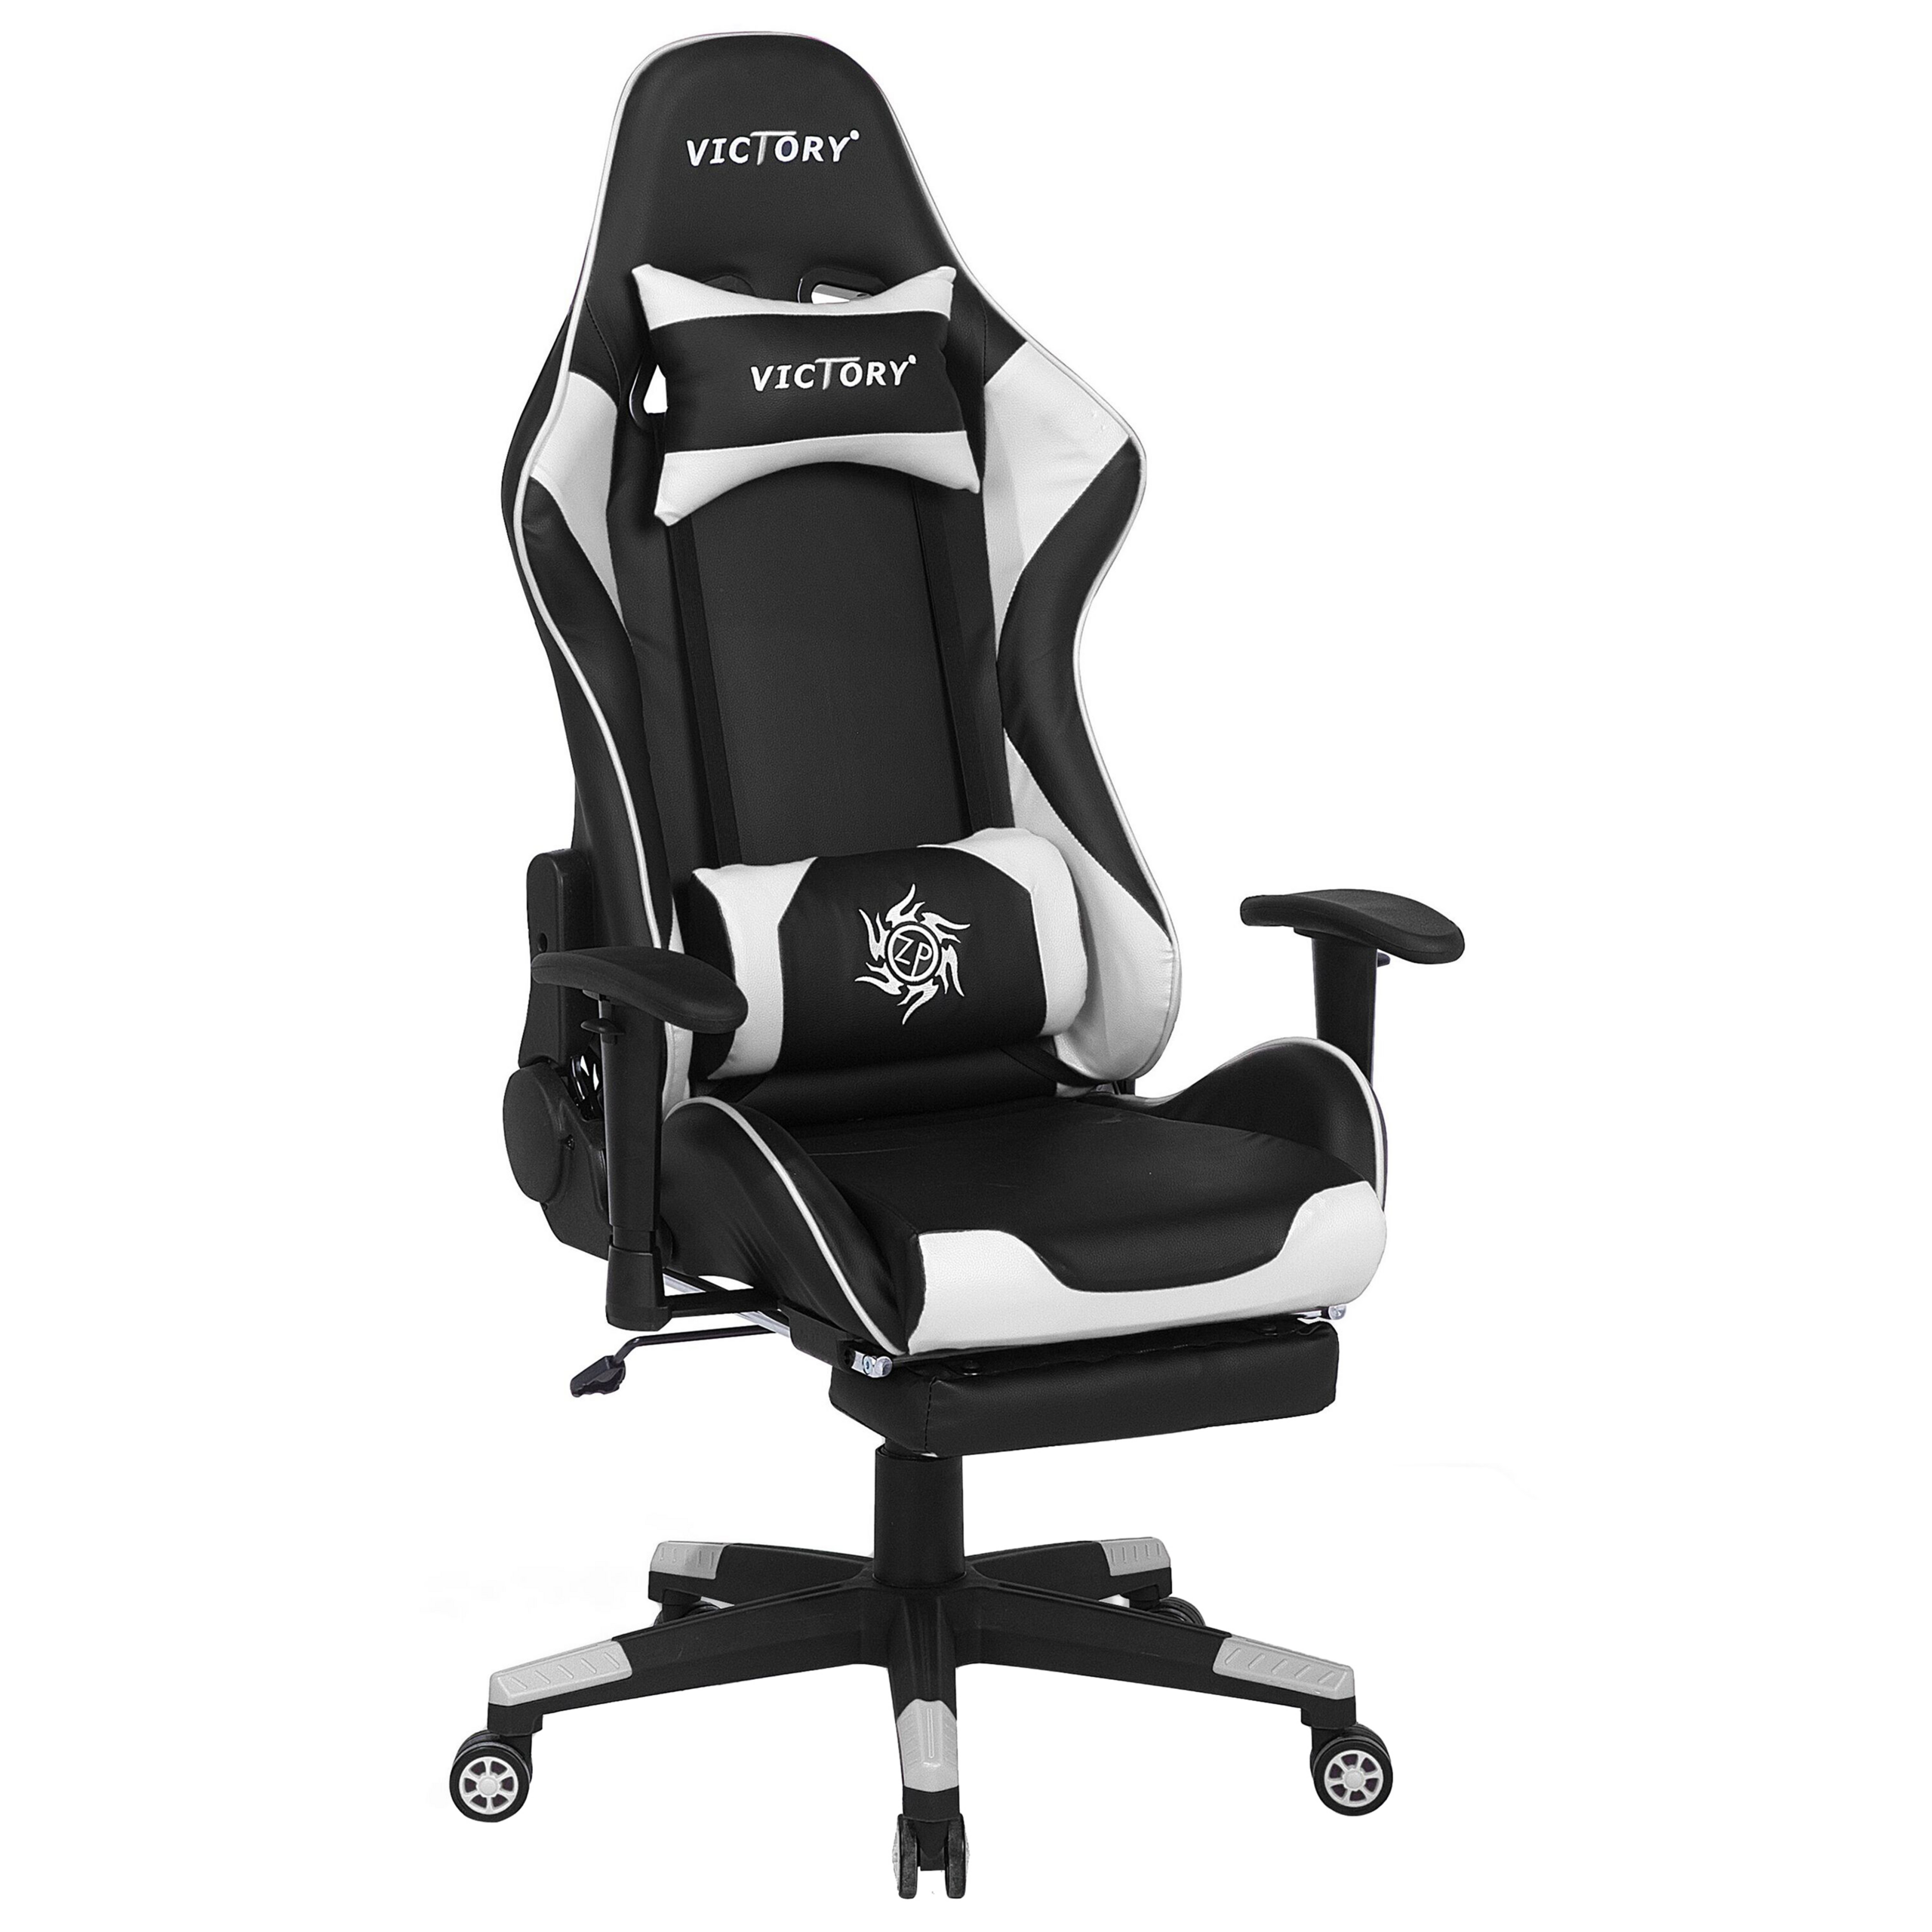 Beliani Gaming Chair Black White Faux Leather Swivel Adjustable Armrests and Height Footrest Modern